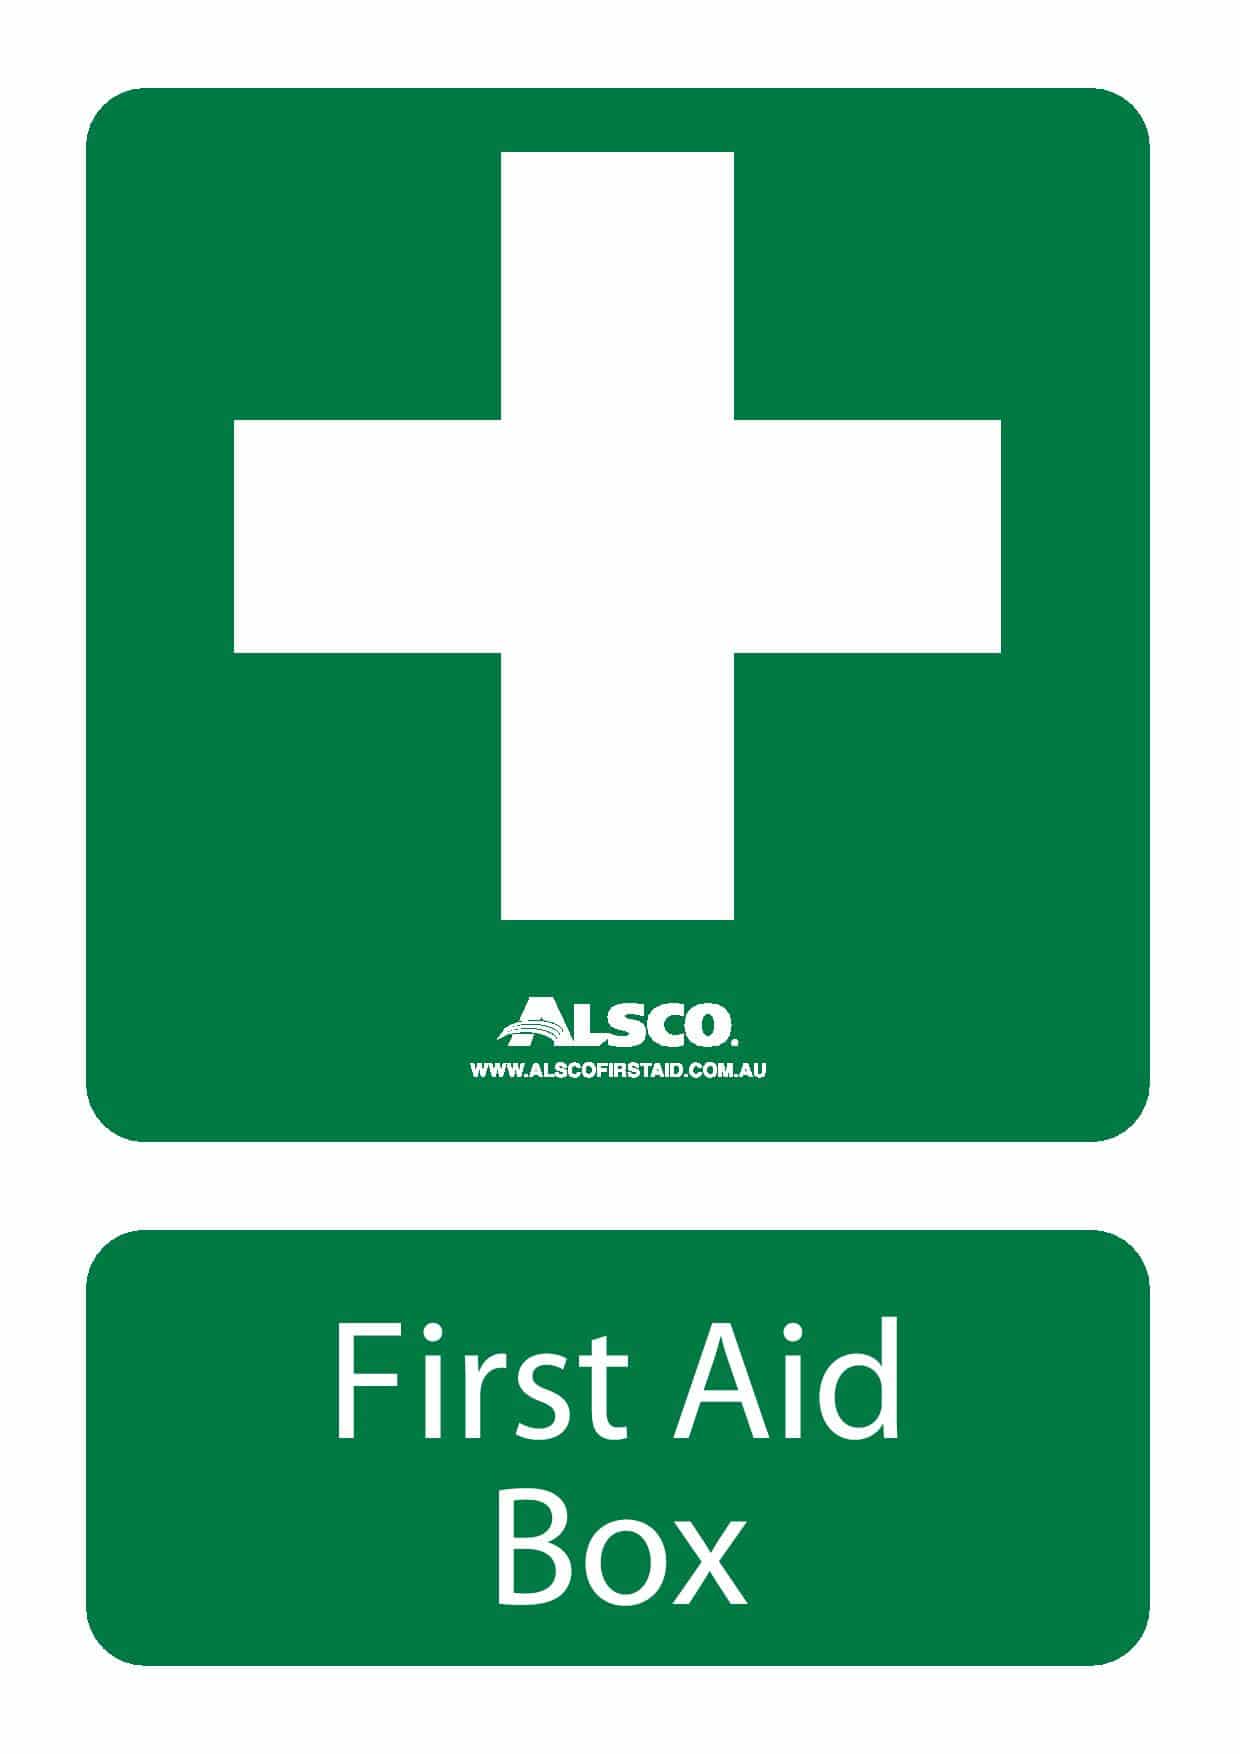 first aid kit sign